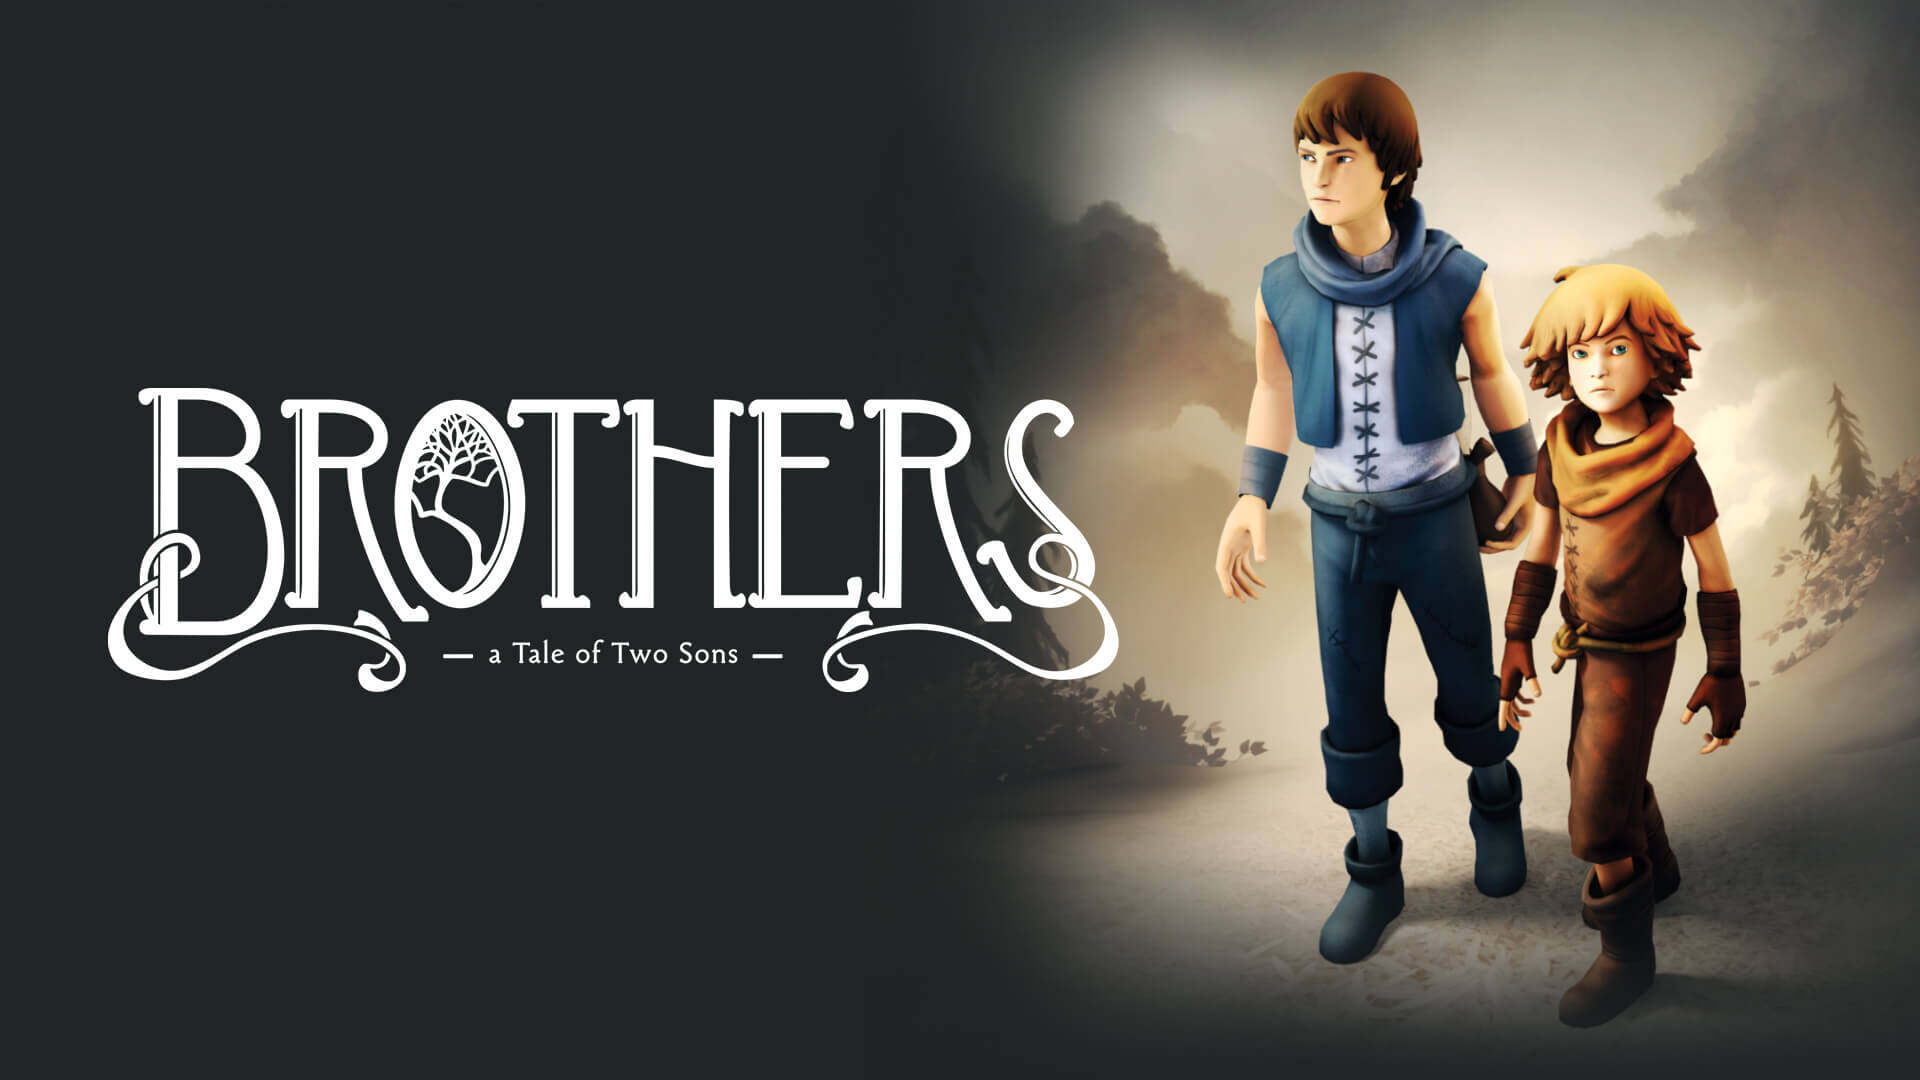 Epic免费领取《Brothers: A Tale of Two Sons》《兄弟：双子传说》喜+1